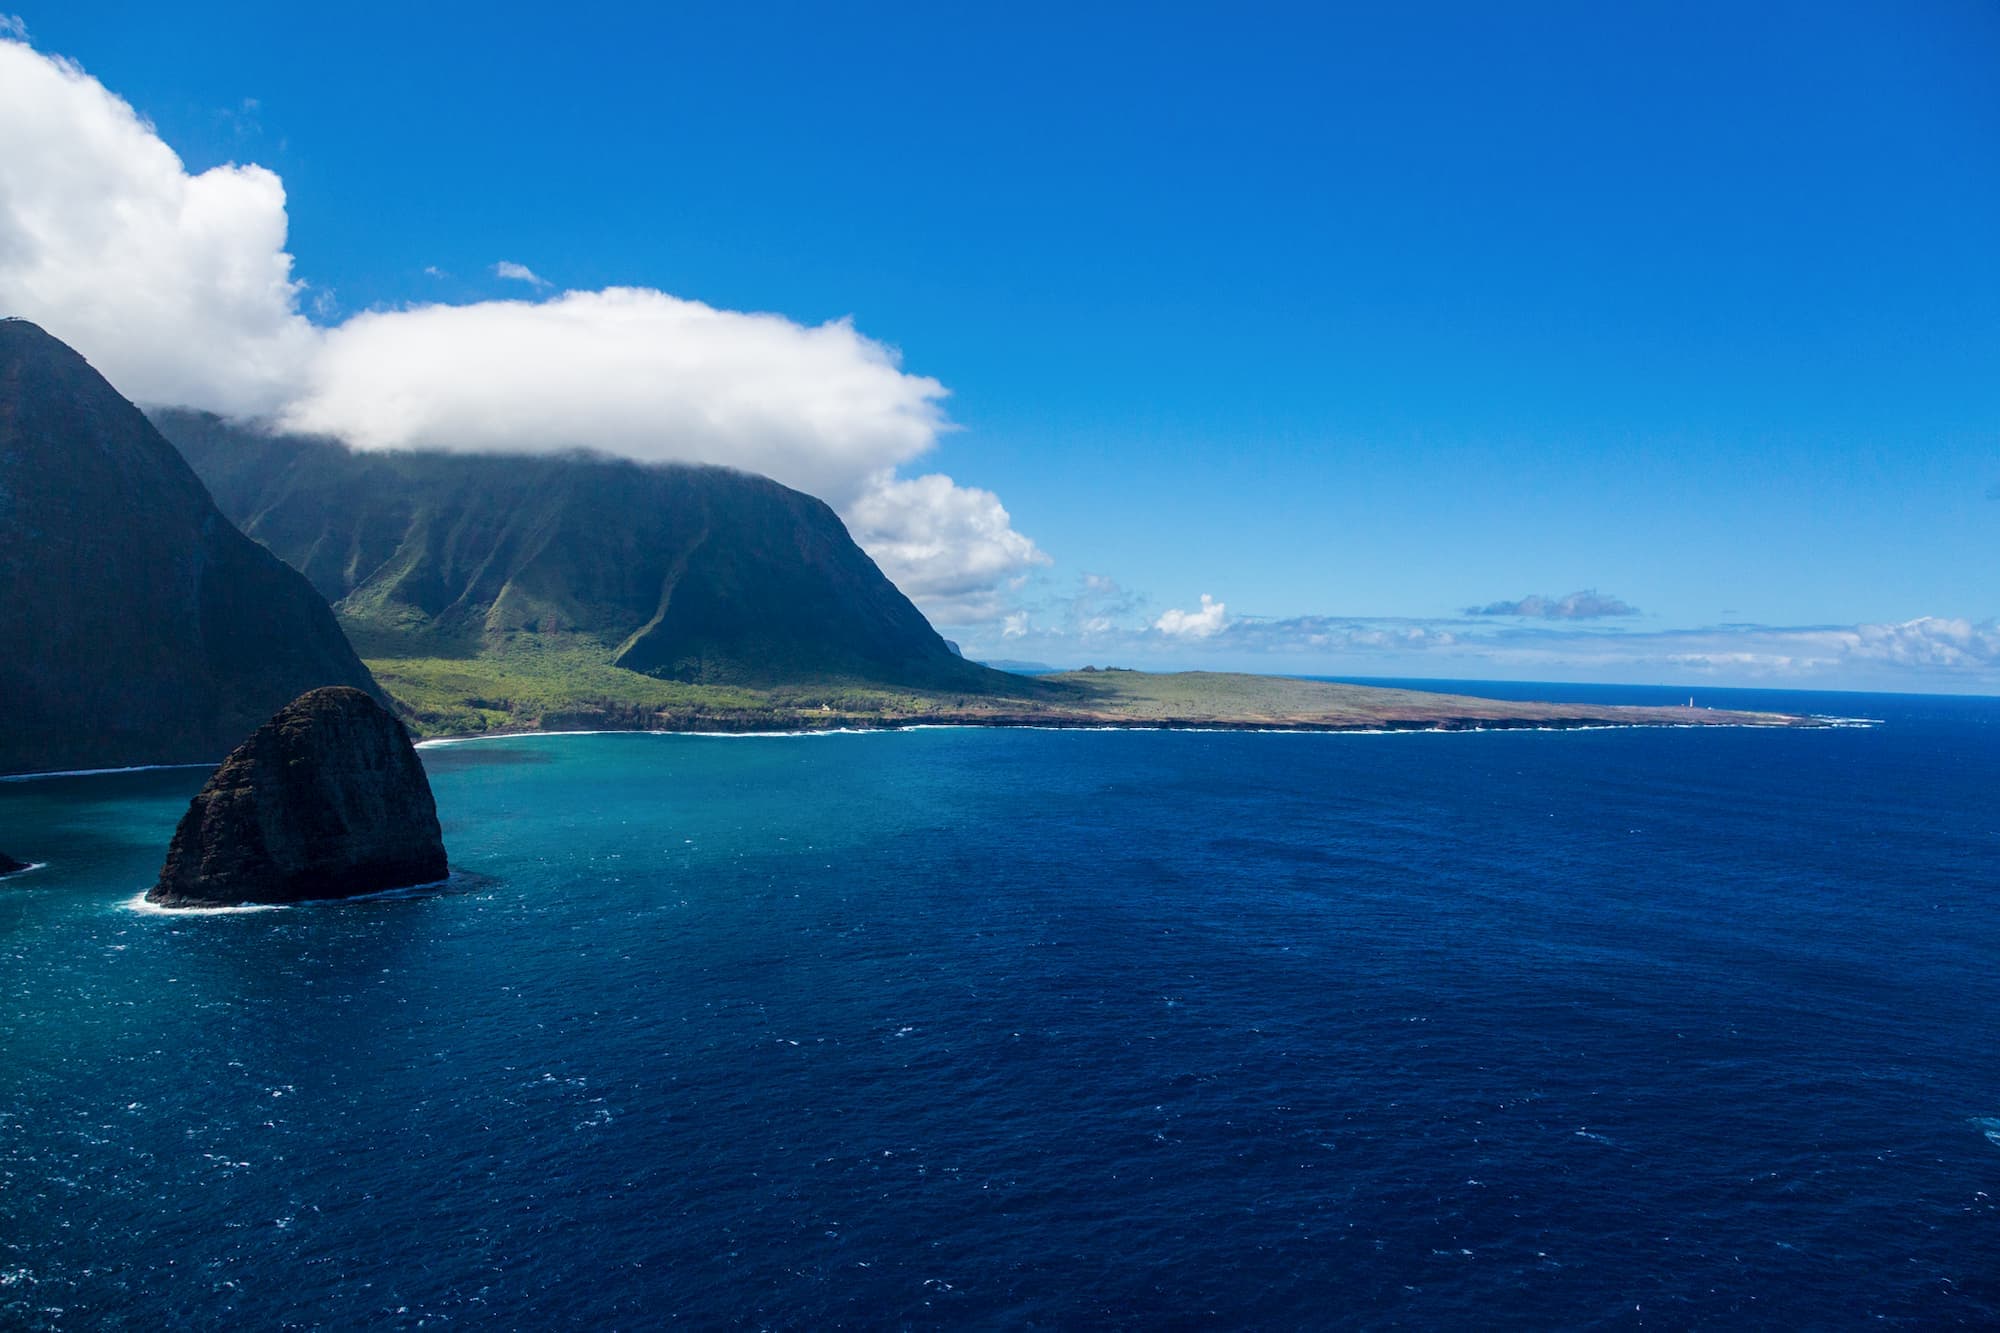 can you visit the island of molokai